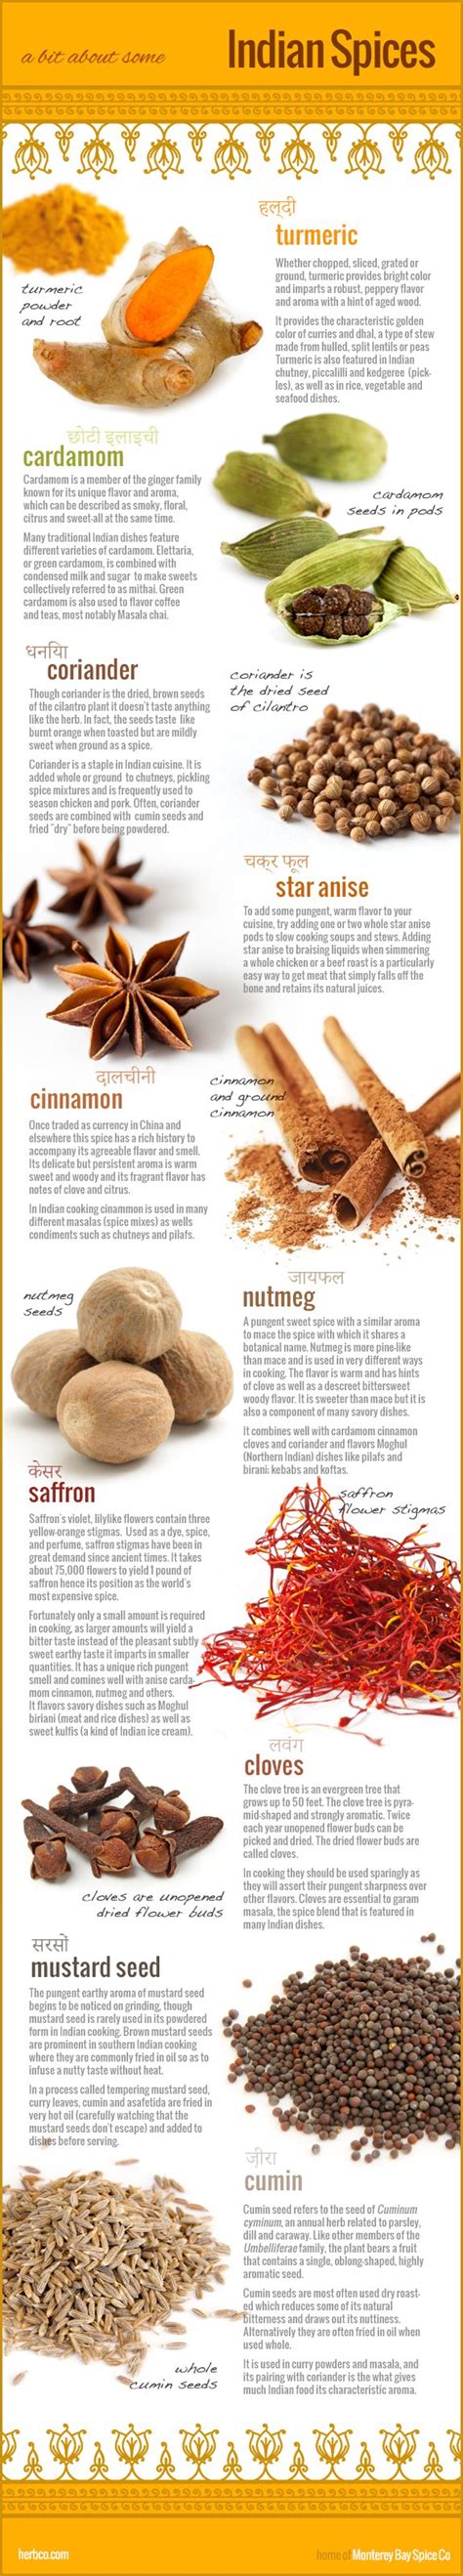 10 Indian Spices Infographic